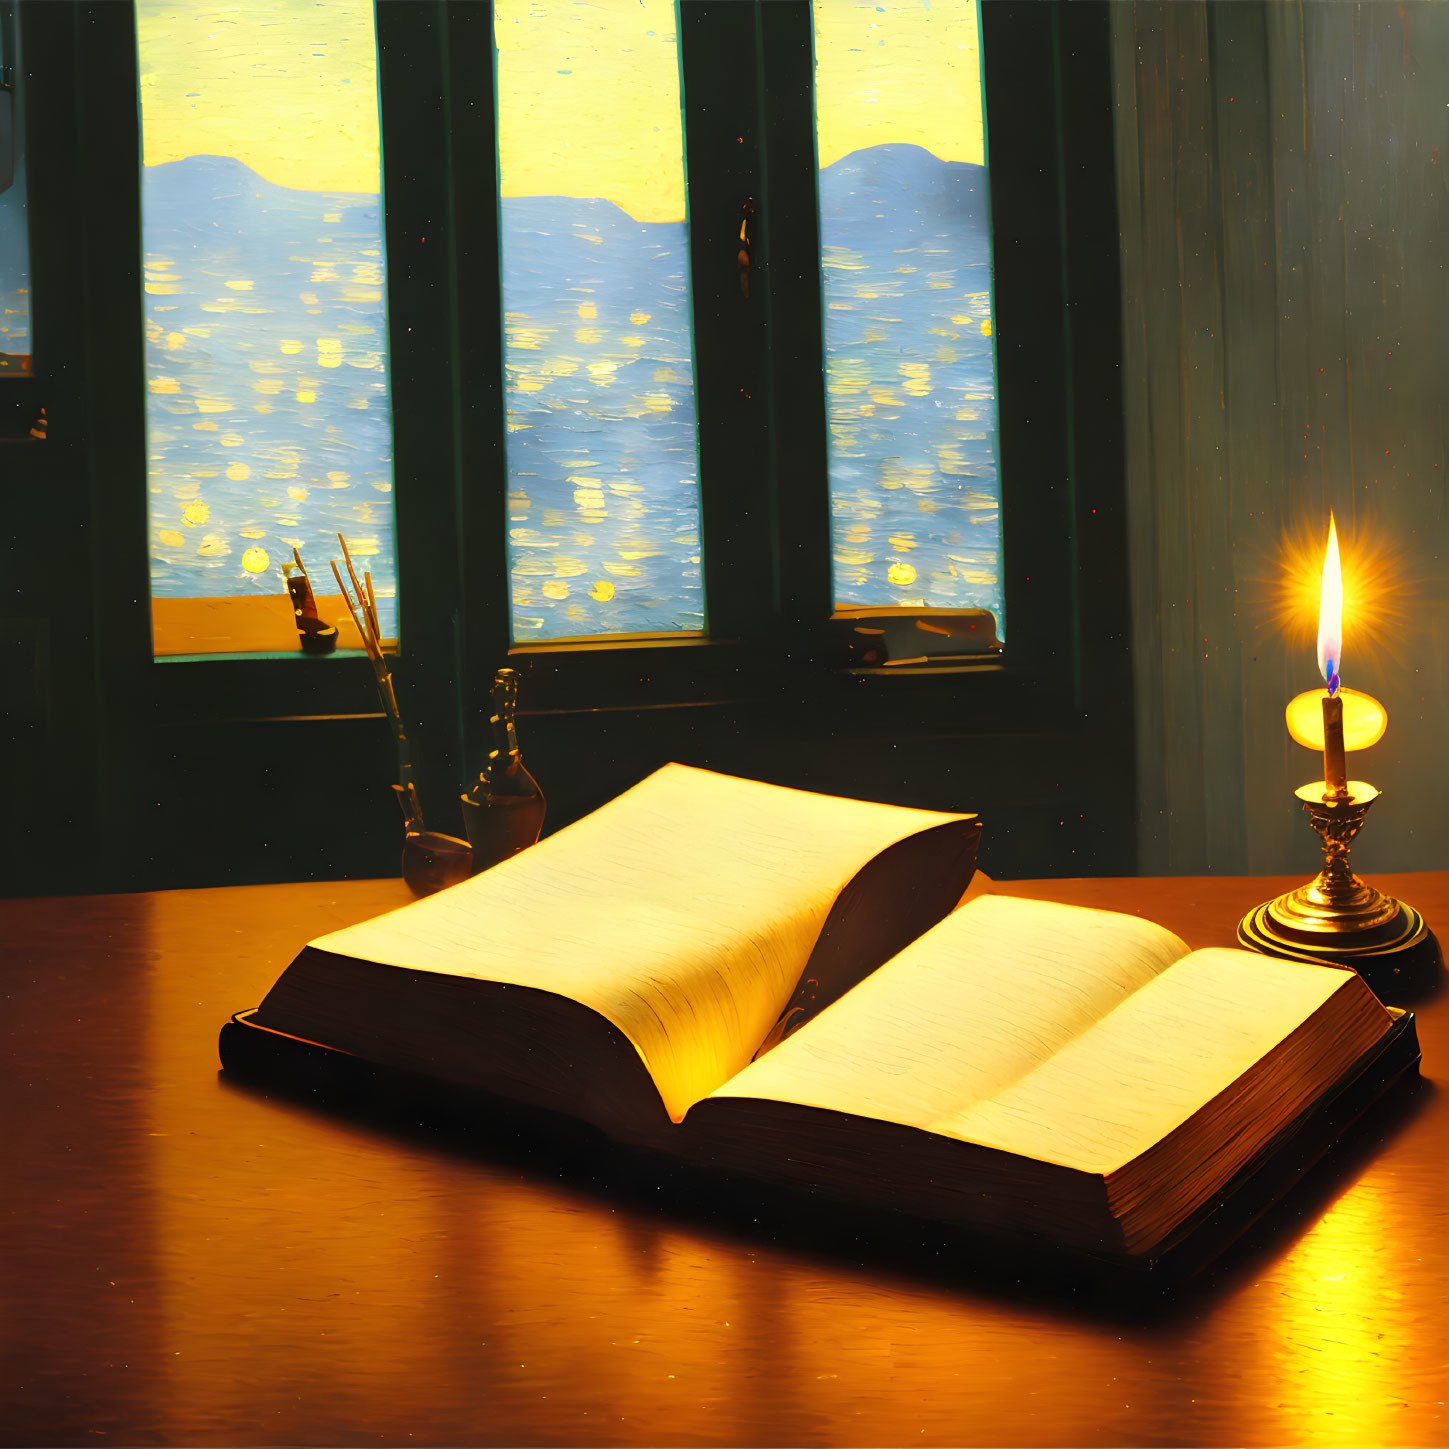 Open book on wooden desk with candle, window view of water and sunlight